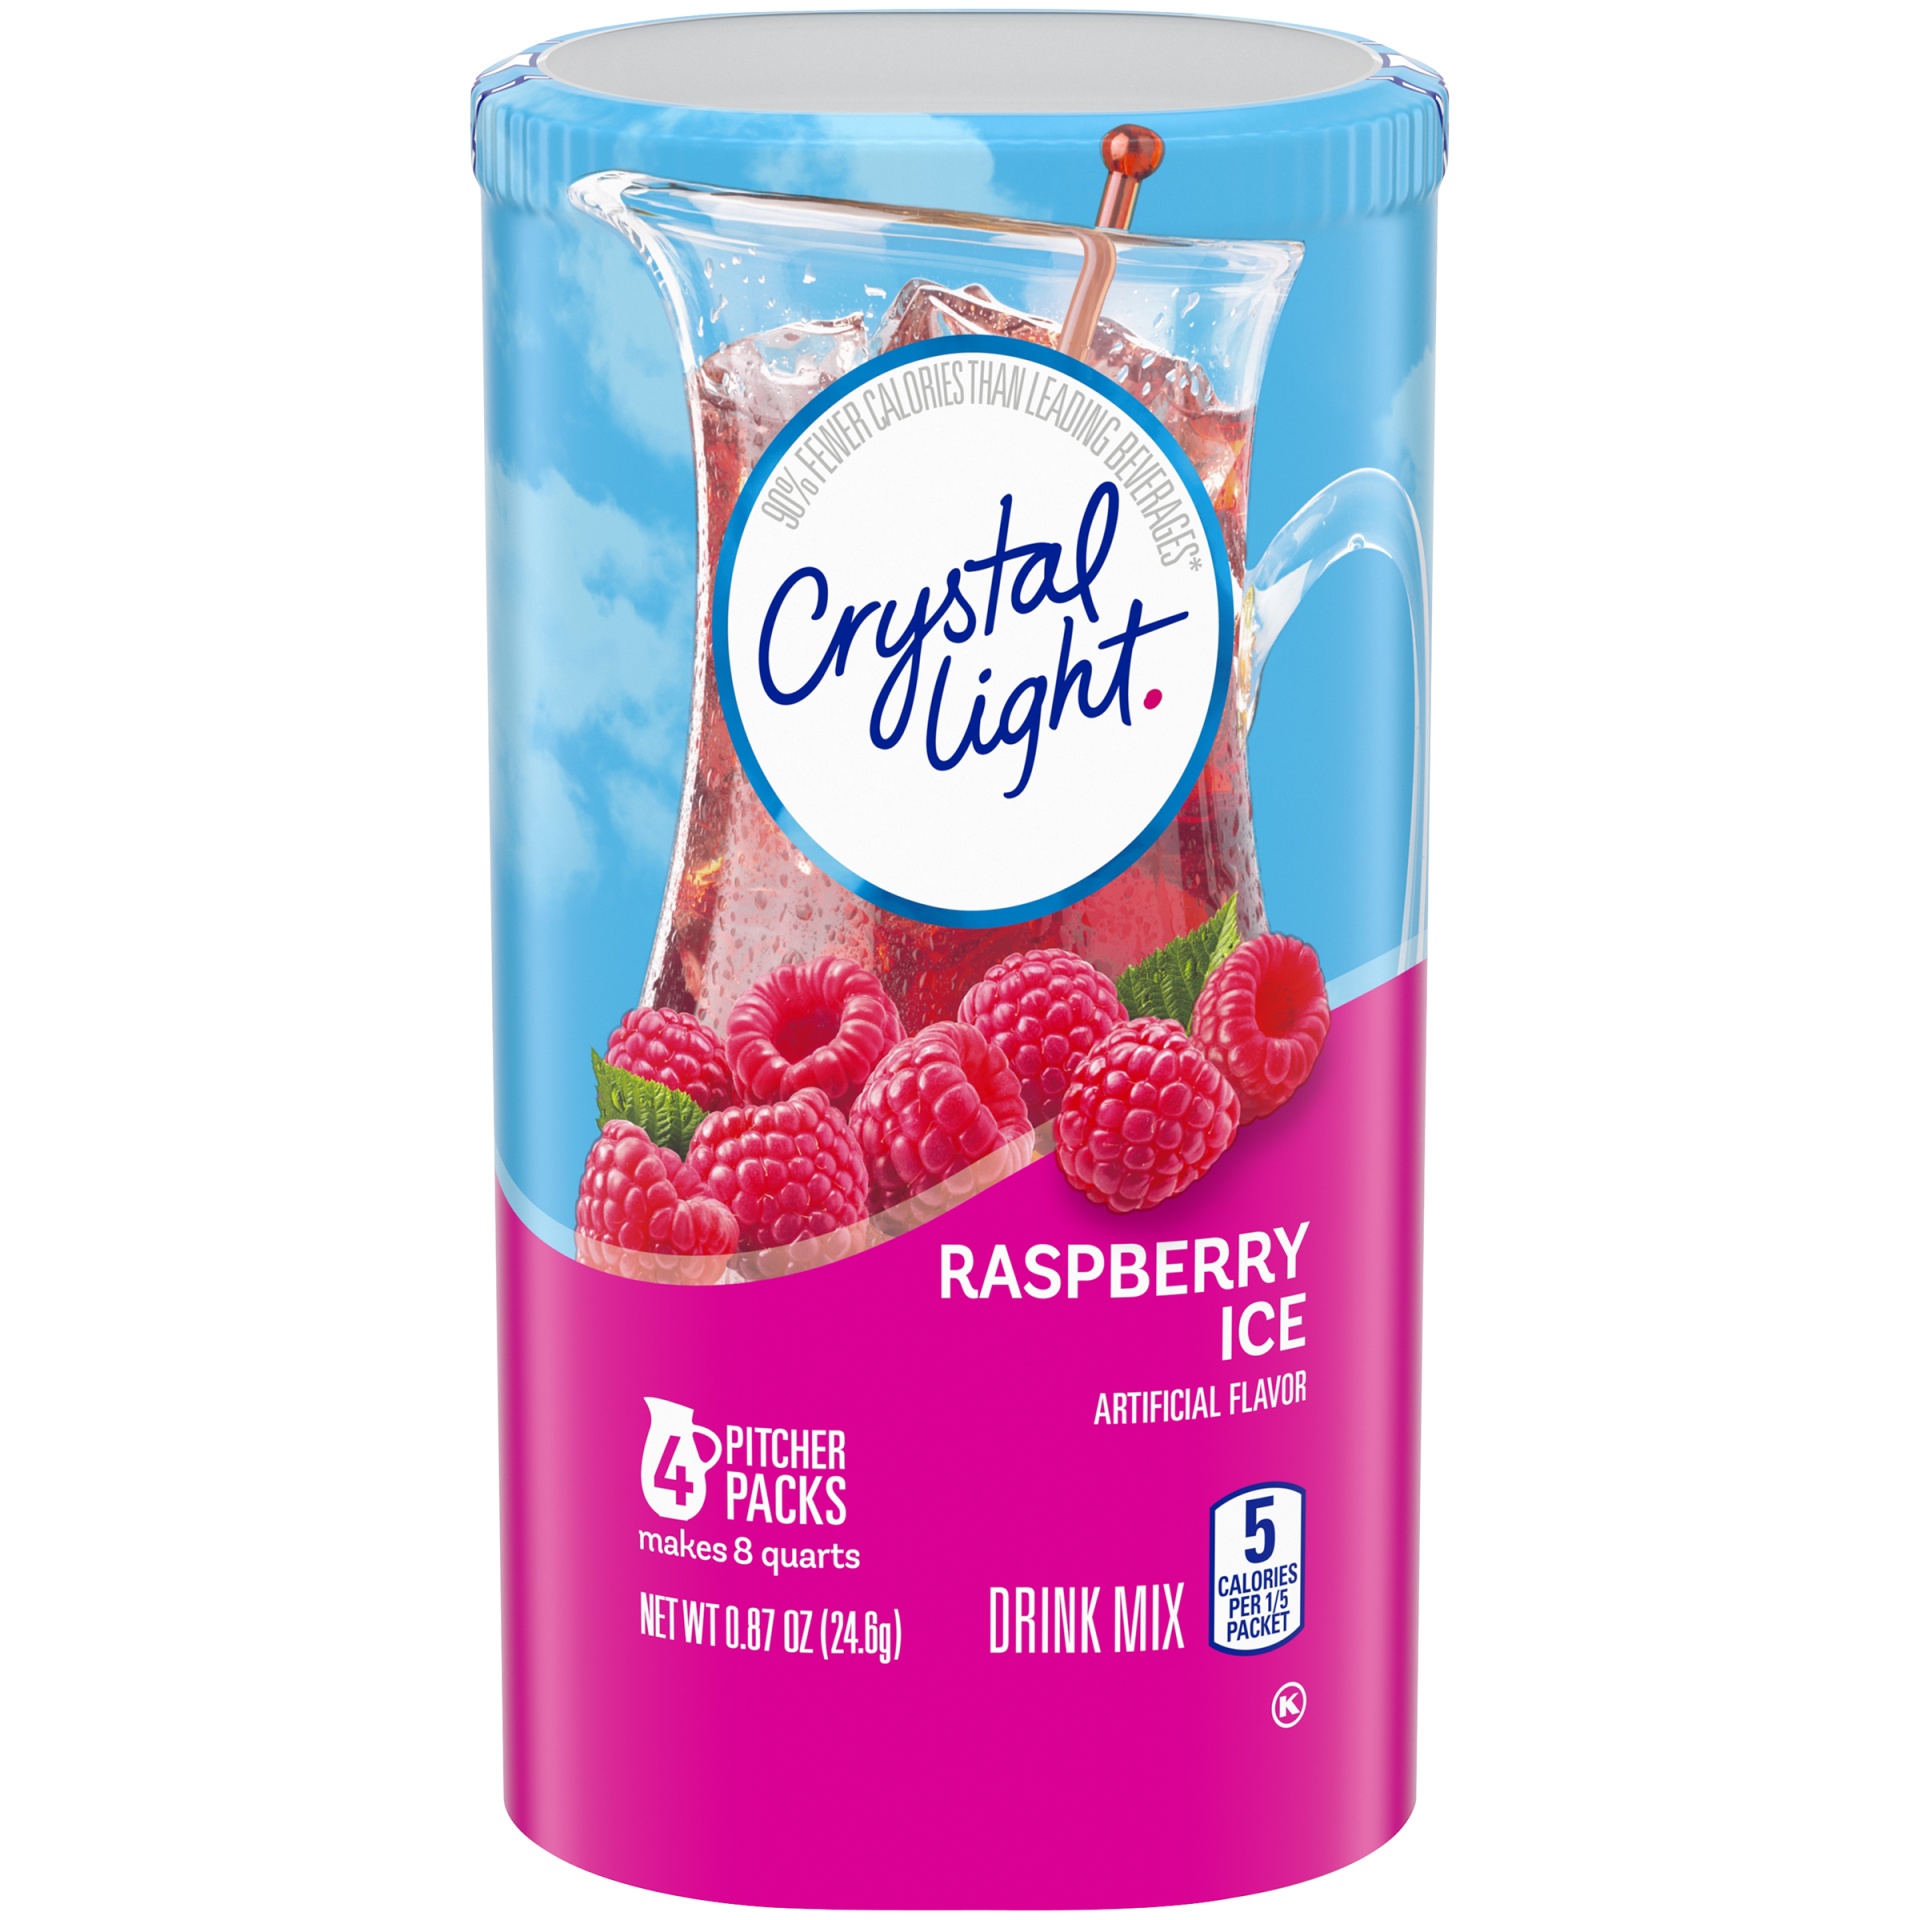 slide 1 of 8, Crystal Light Raspberry Ice Artificially Flavored Powdered Drink Mix Pitcher, 0.87 oz